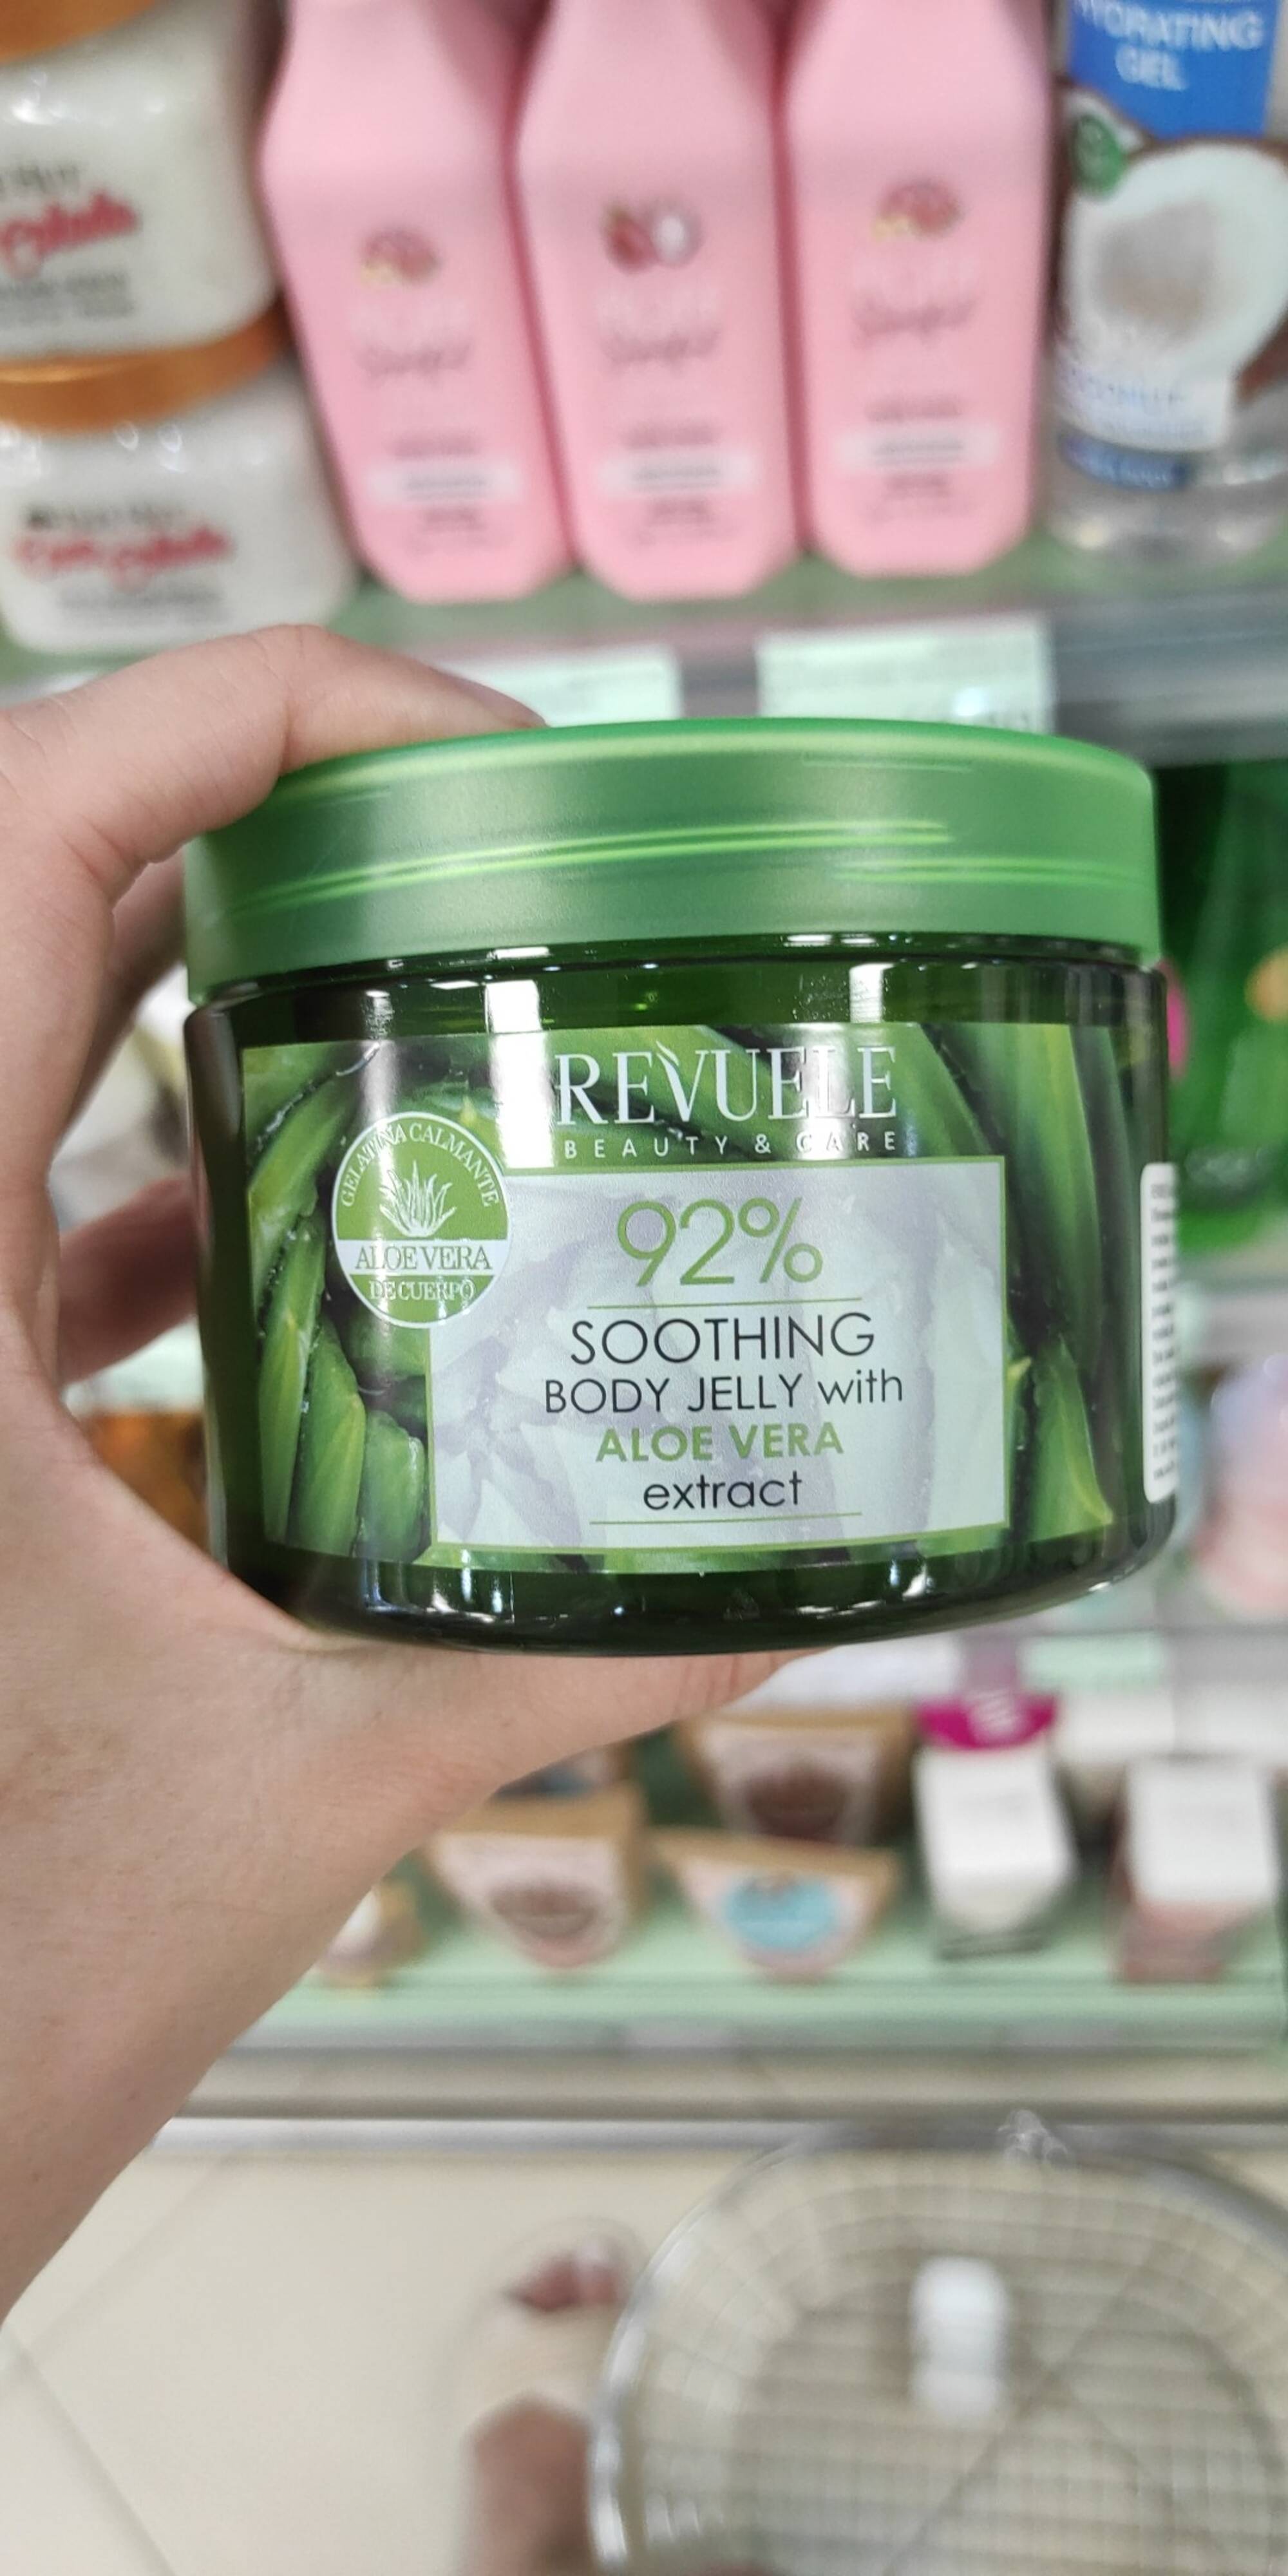 REVUELE - Soothing body jelly with aloe vera extract